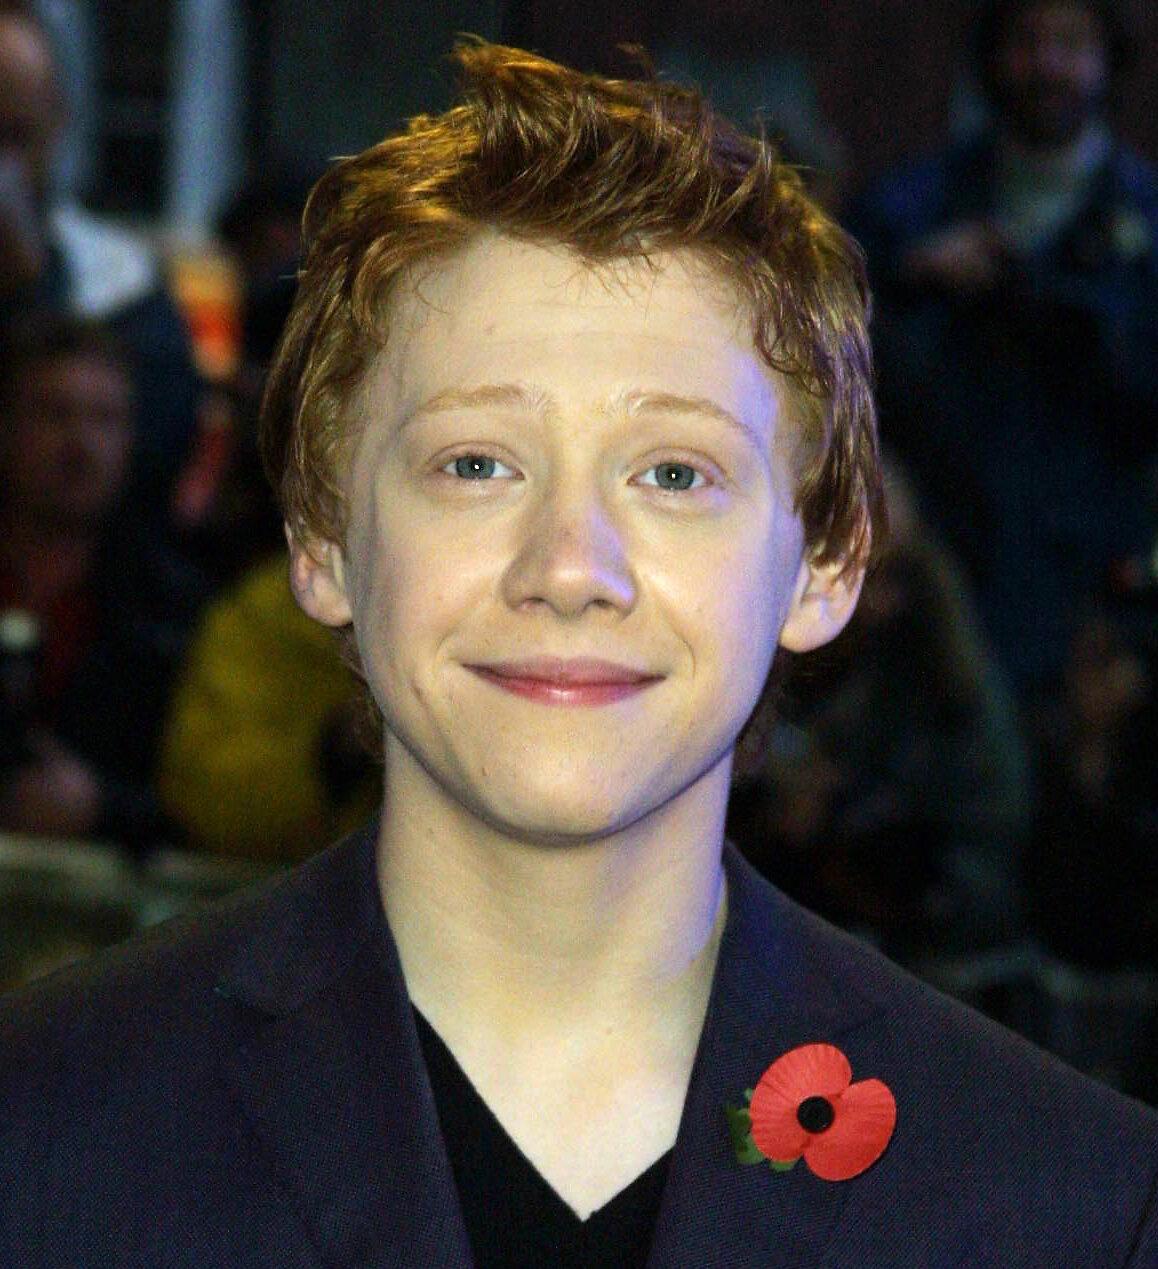 World premiere of Harry Potter and the Chamber of Secrets in 2002 Rupert Grint